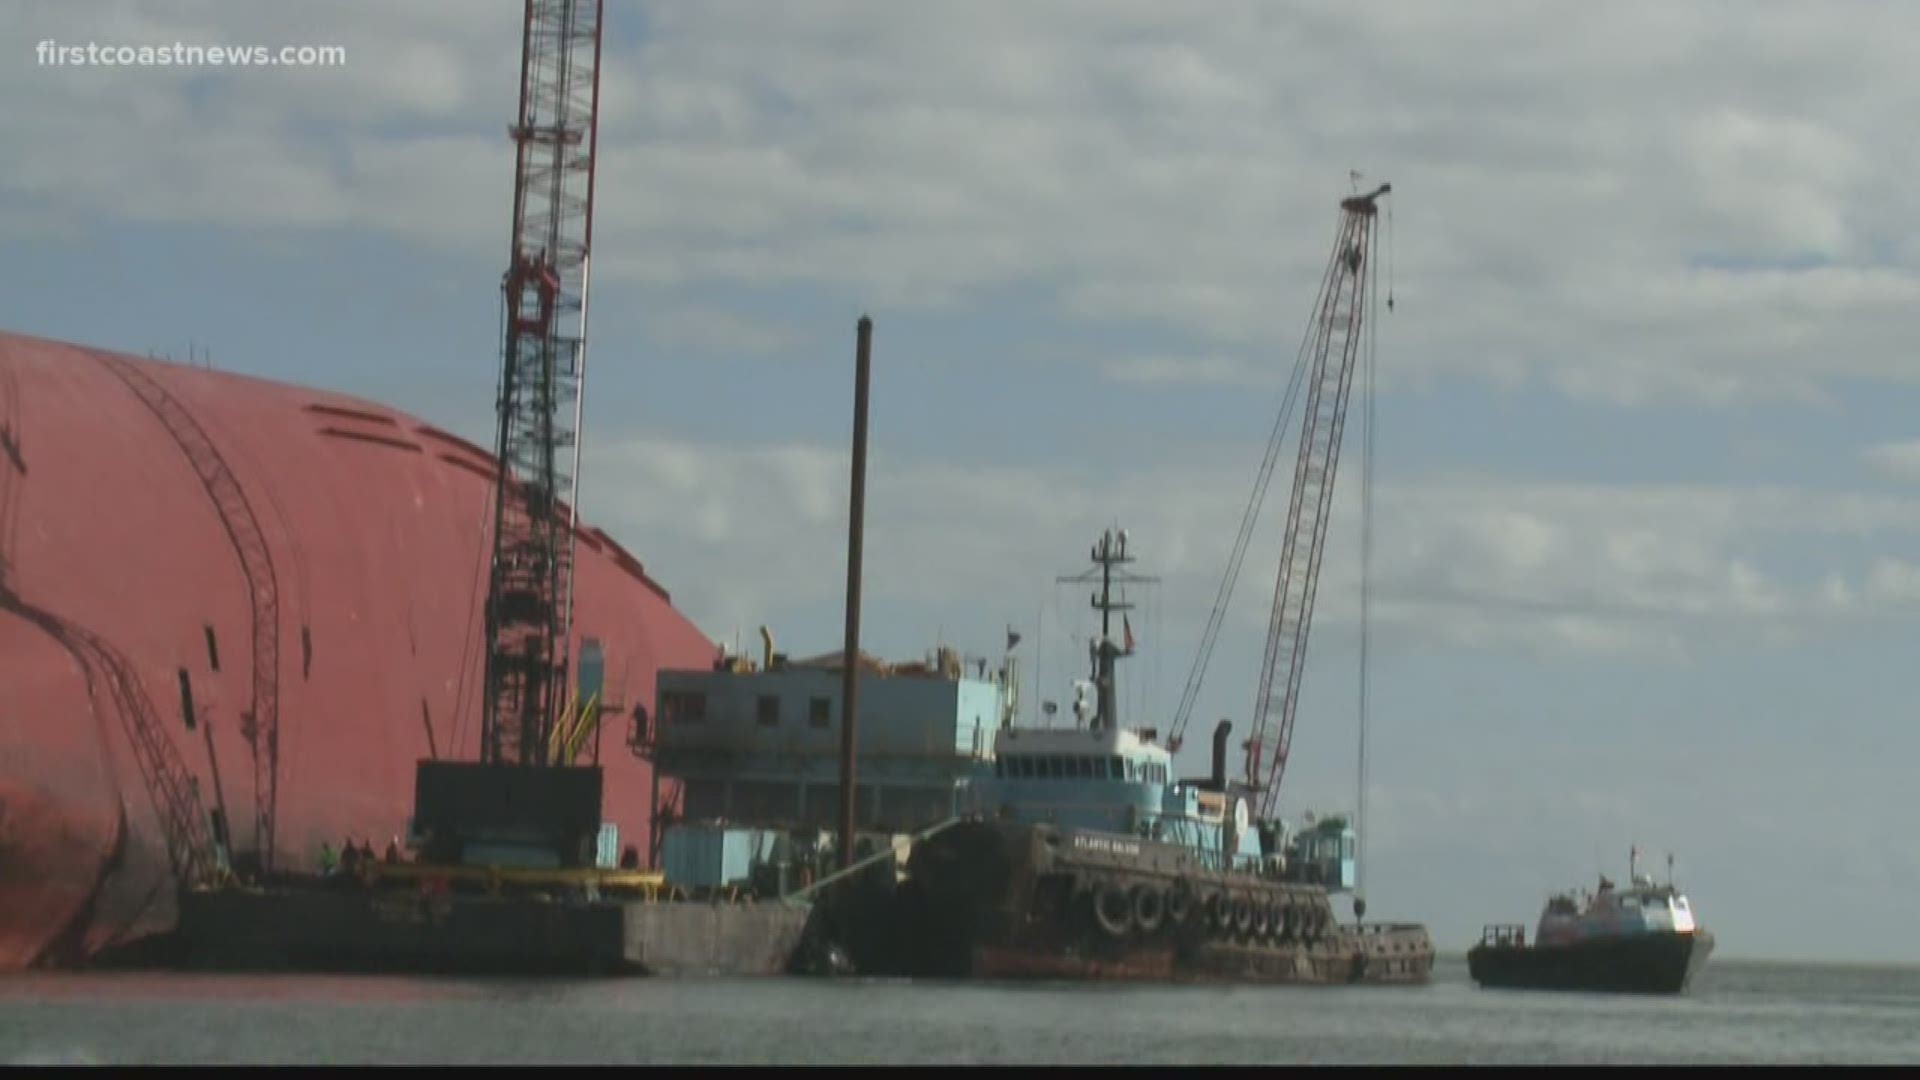 “Removal of the prop and rudder are a big help in taking some of the weight off the ship. But also too, we still have 50,000 gallons of contaminants on the ship."